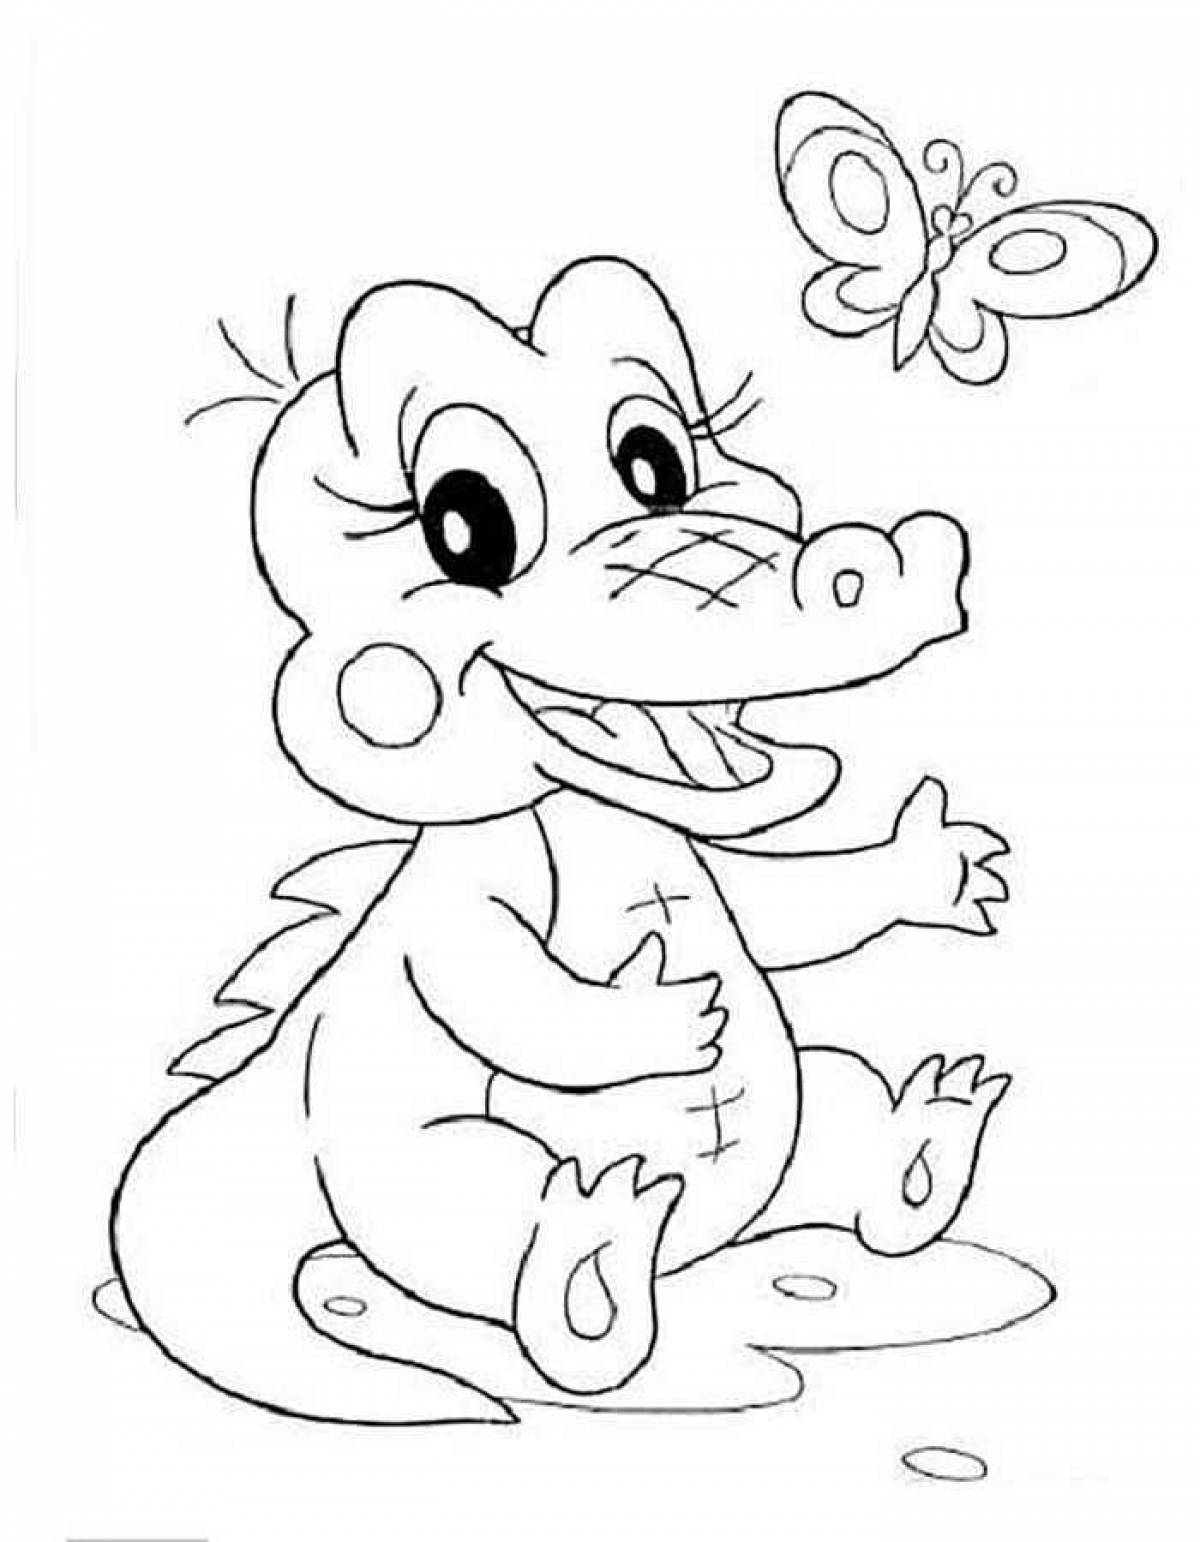 Coloring page 45 years old